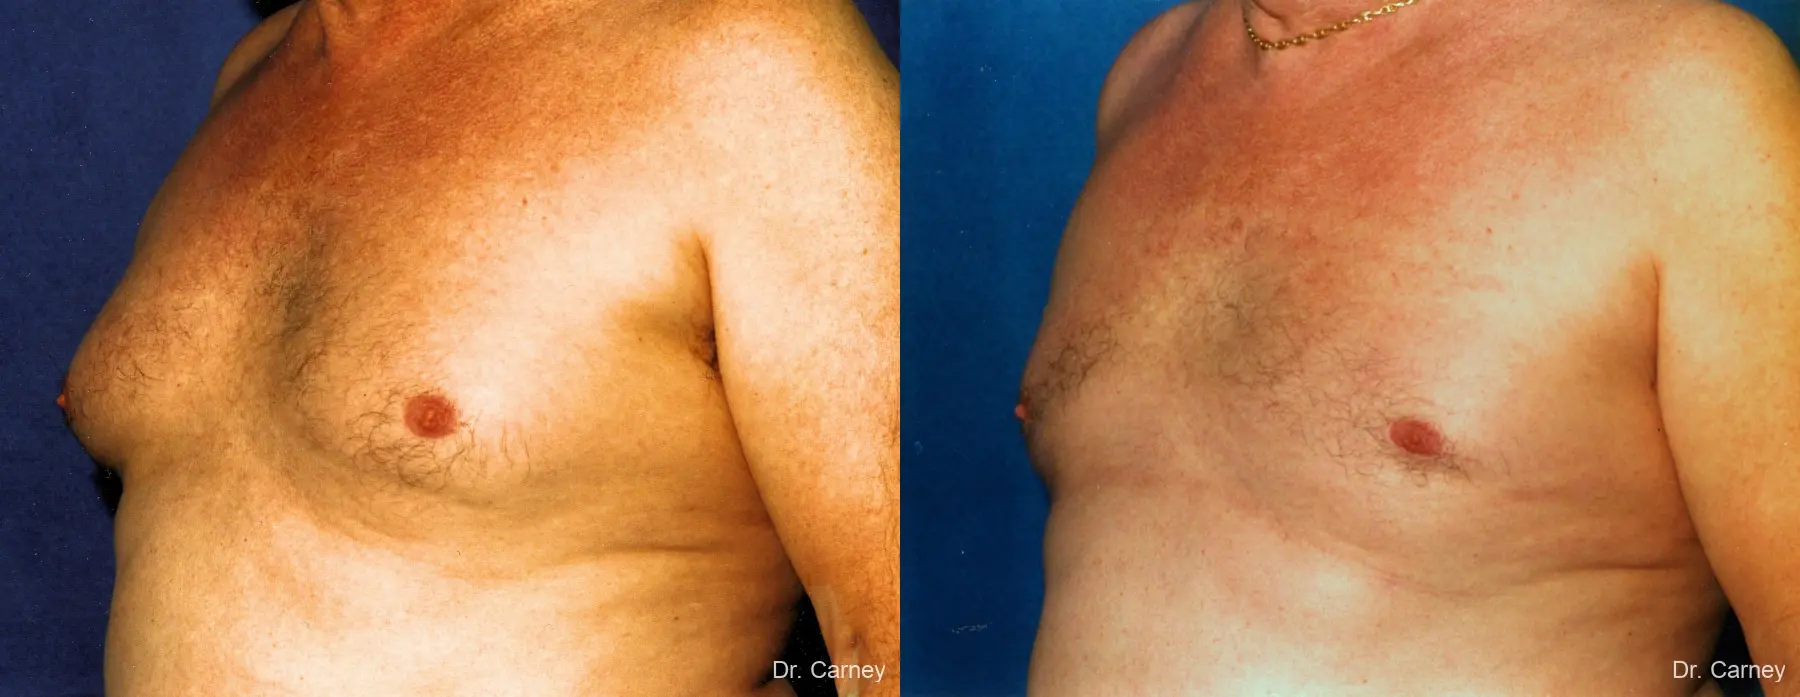 Virginia Beach Gynecomastia 1227 - Before and After